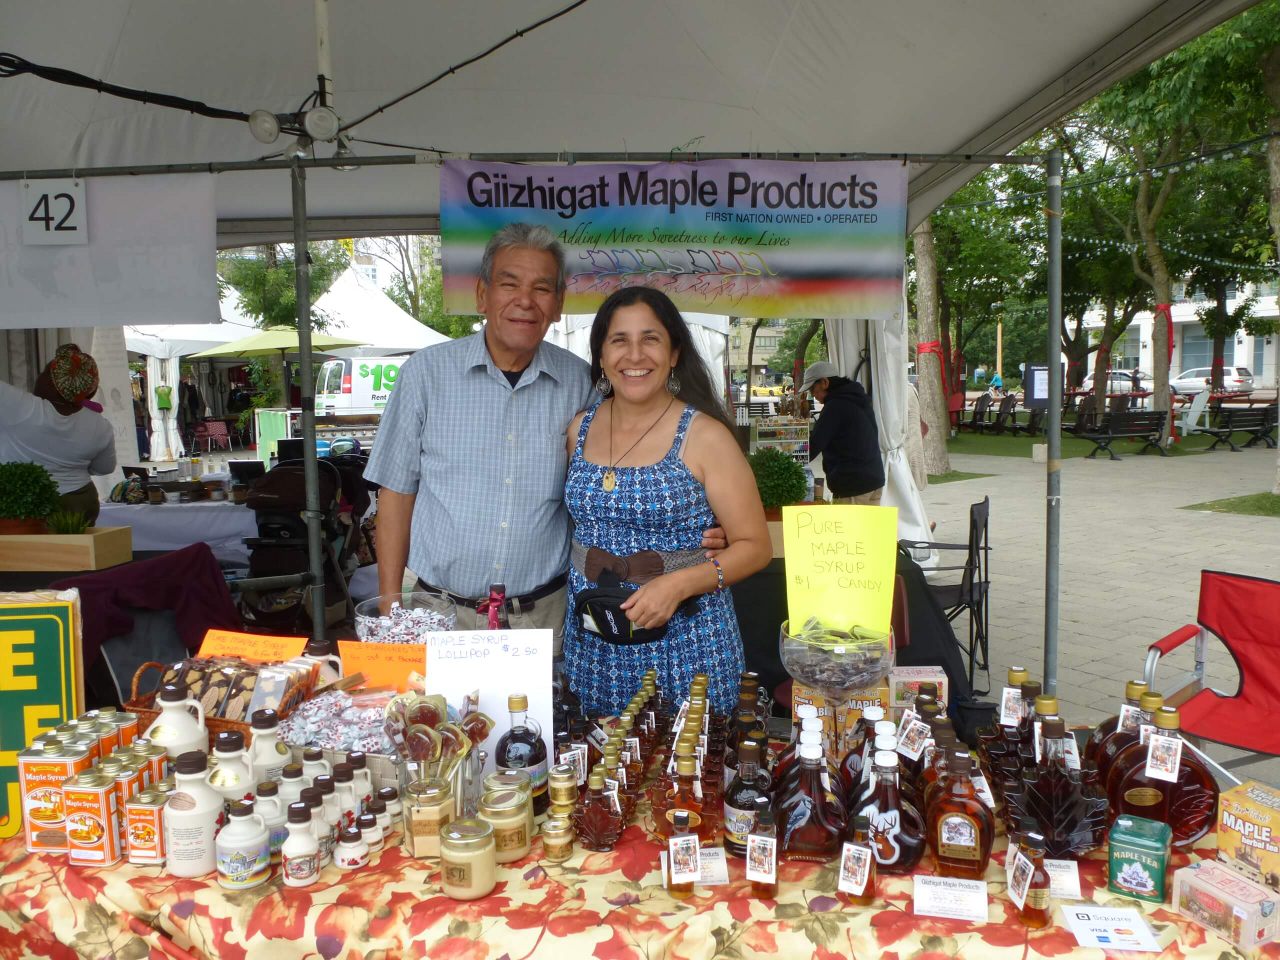 Isaac Day and Deborah Aaron, owners of Giizhigat Maple Products, at the 2020 Planet IndigenUs event in Toronto.